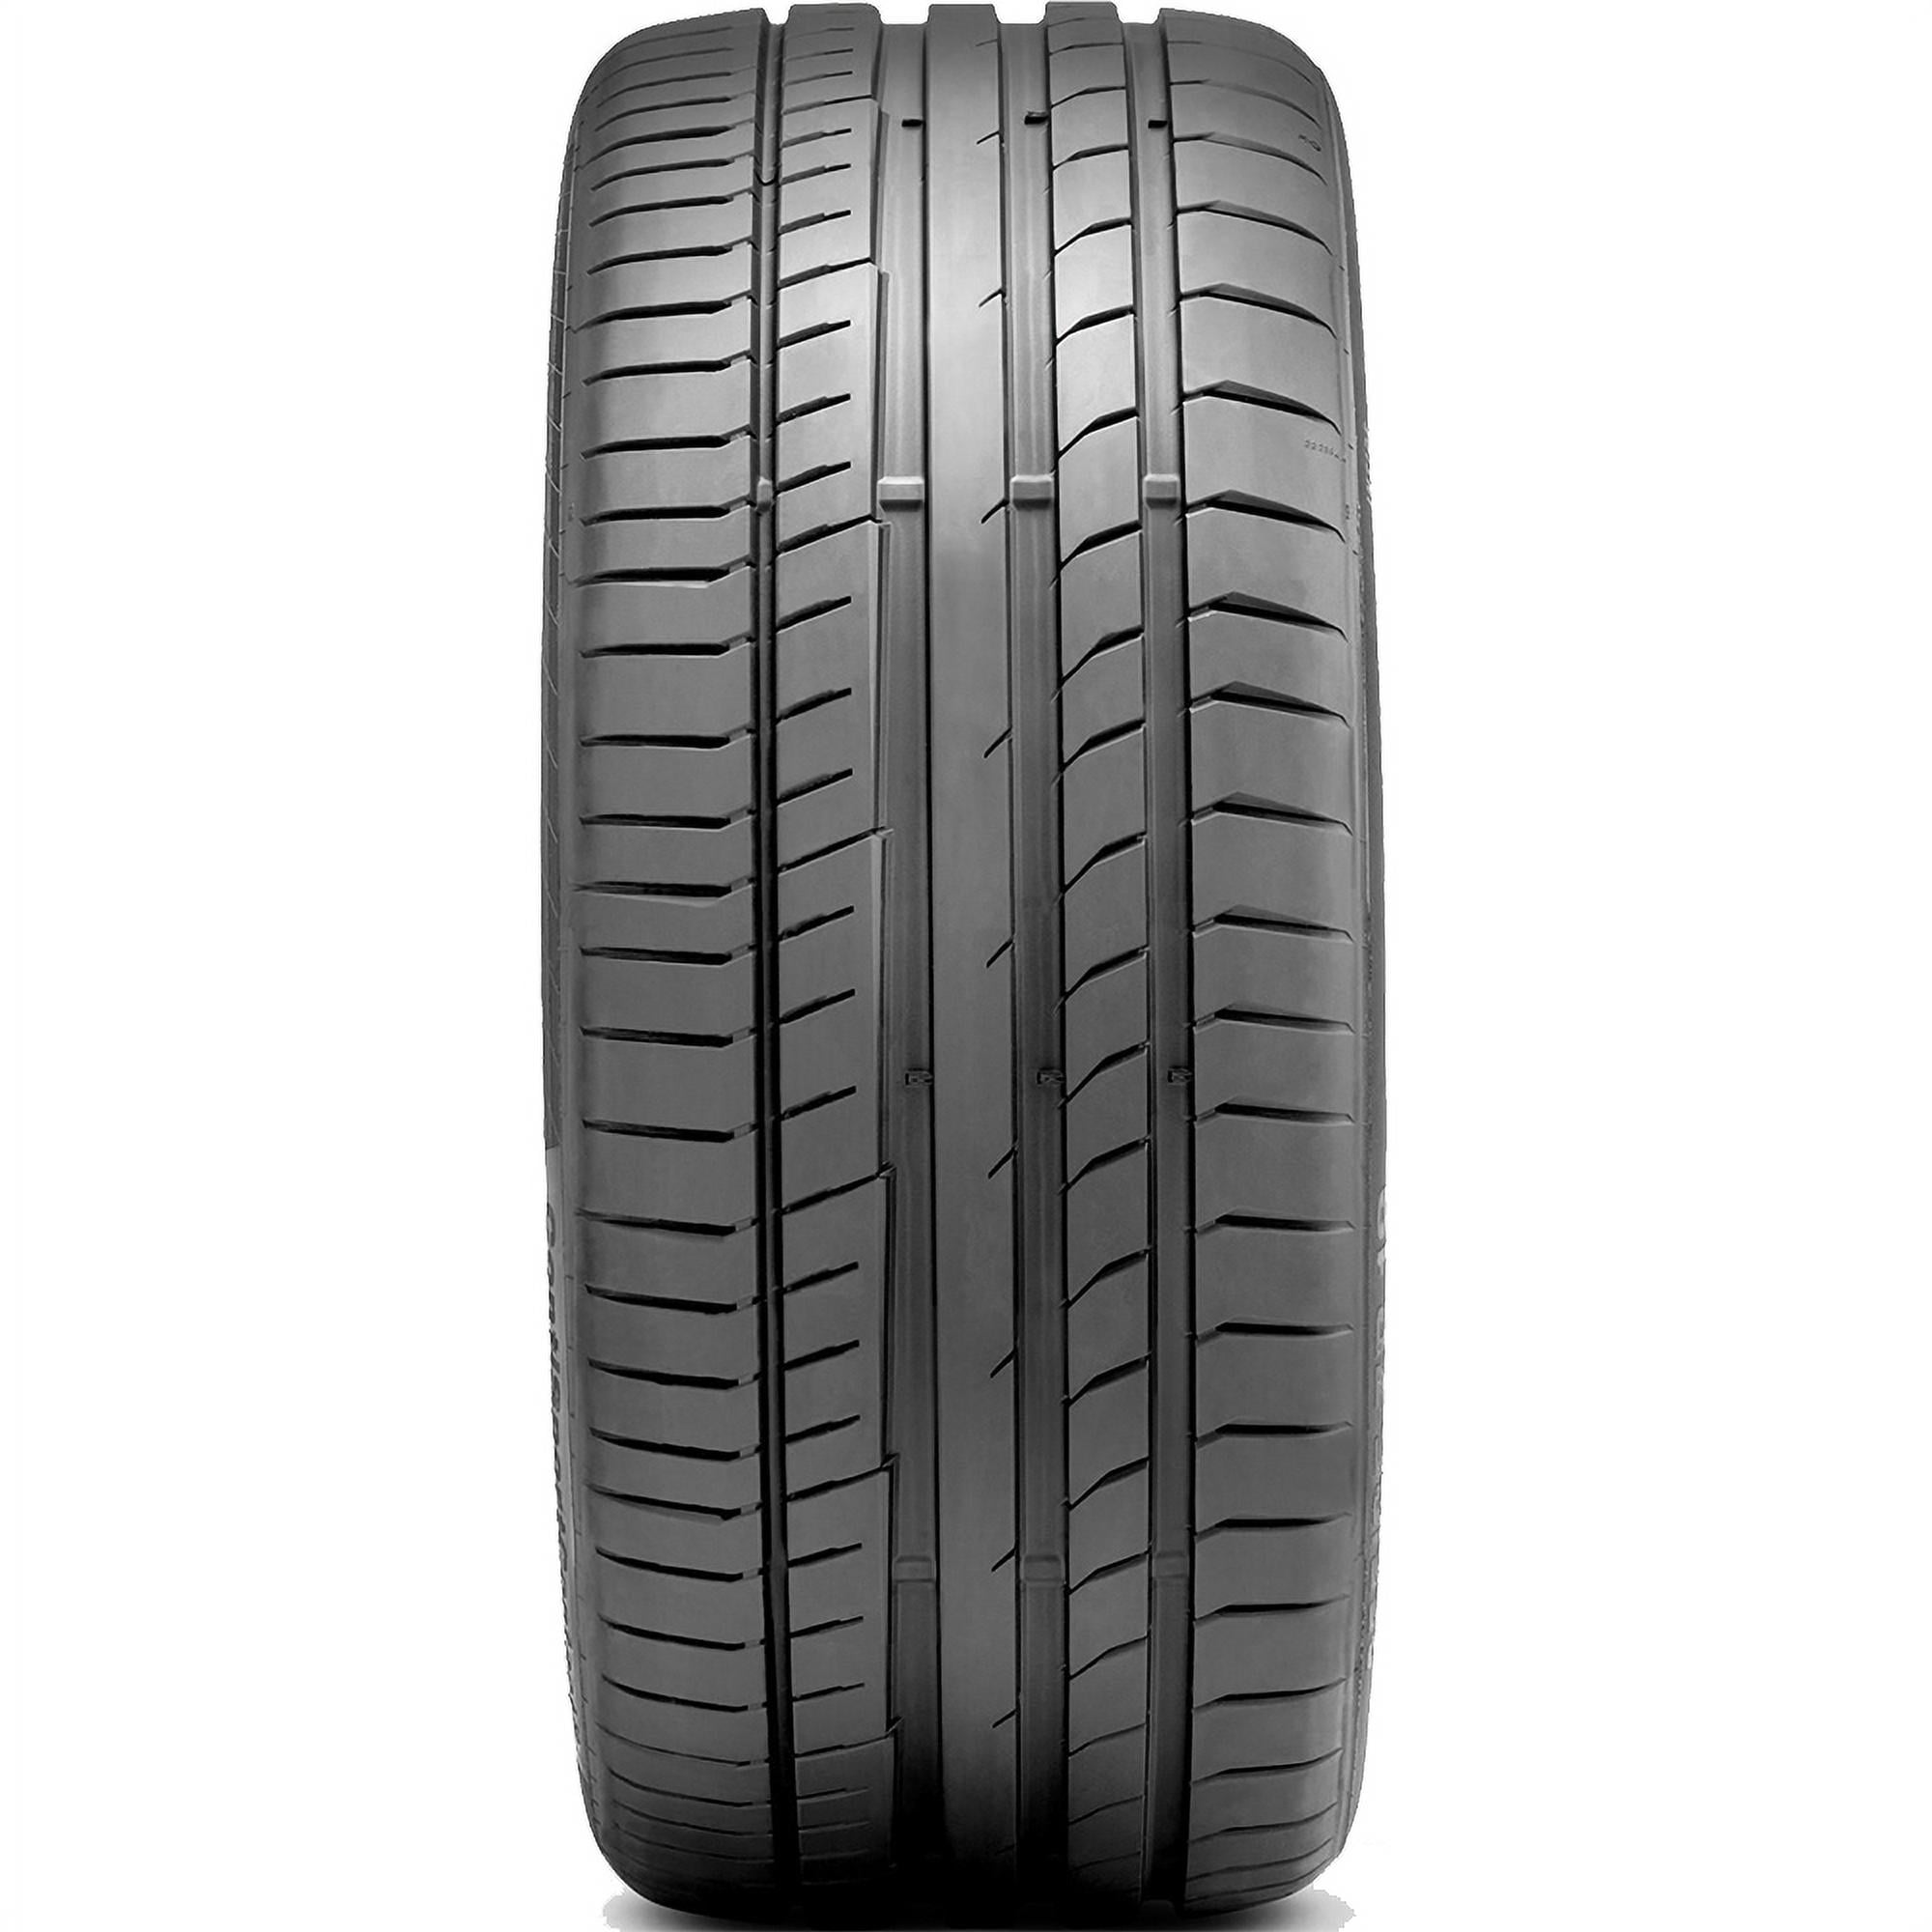 Passenger ContiSportContact XL 91Y 235/35R19 Continental Tire Summer 5P